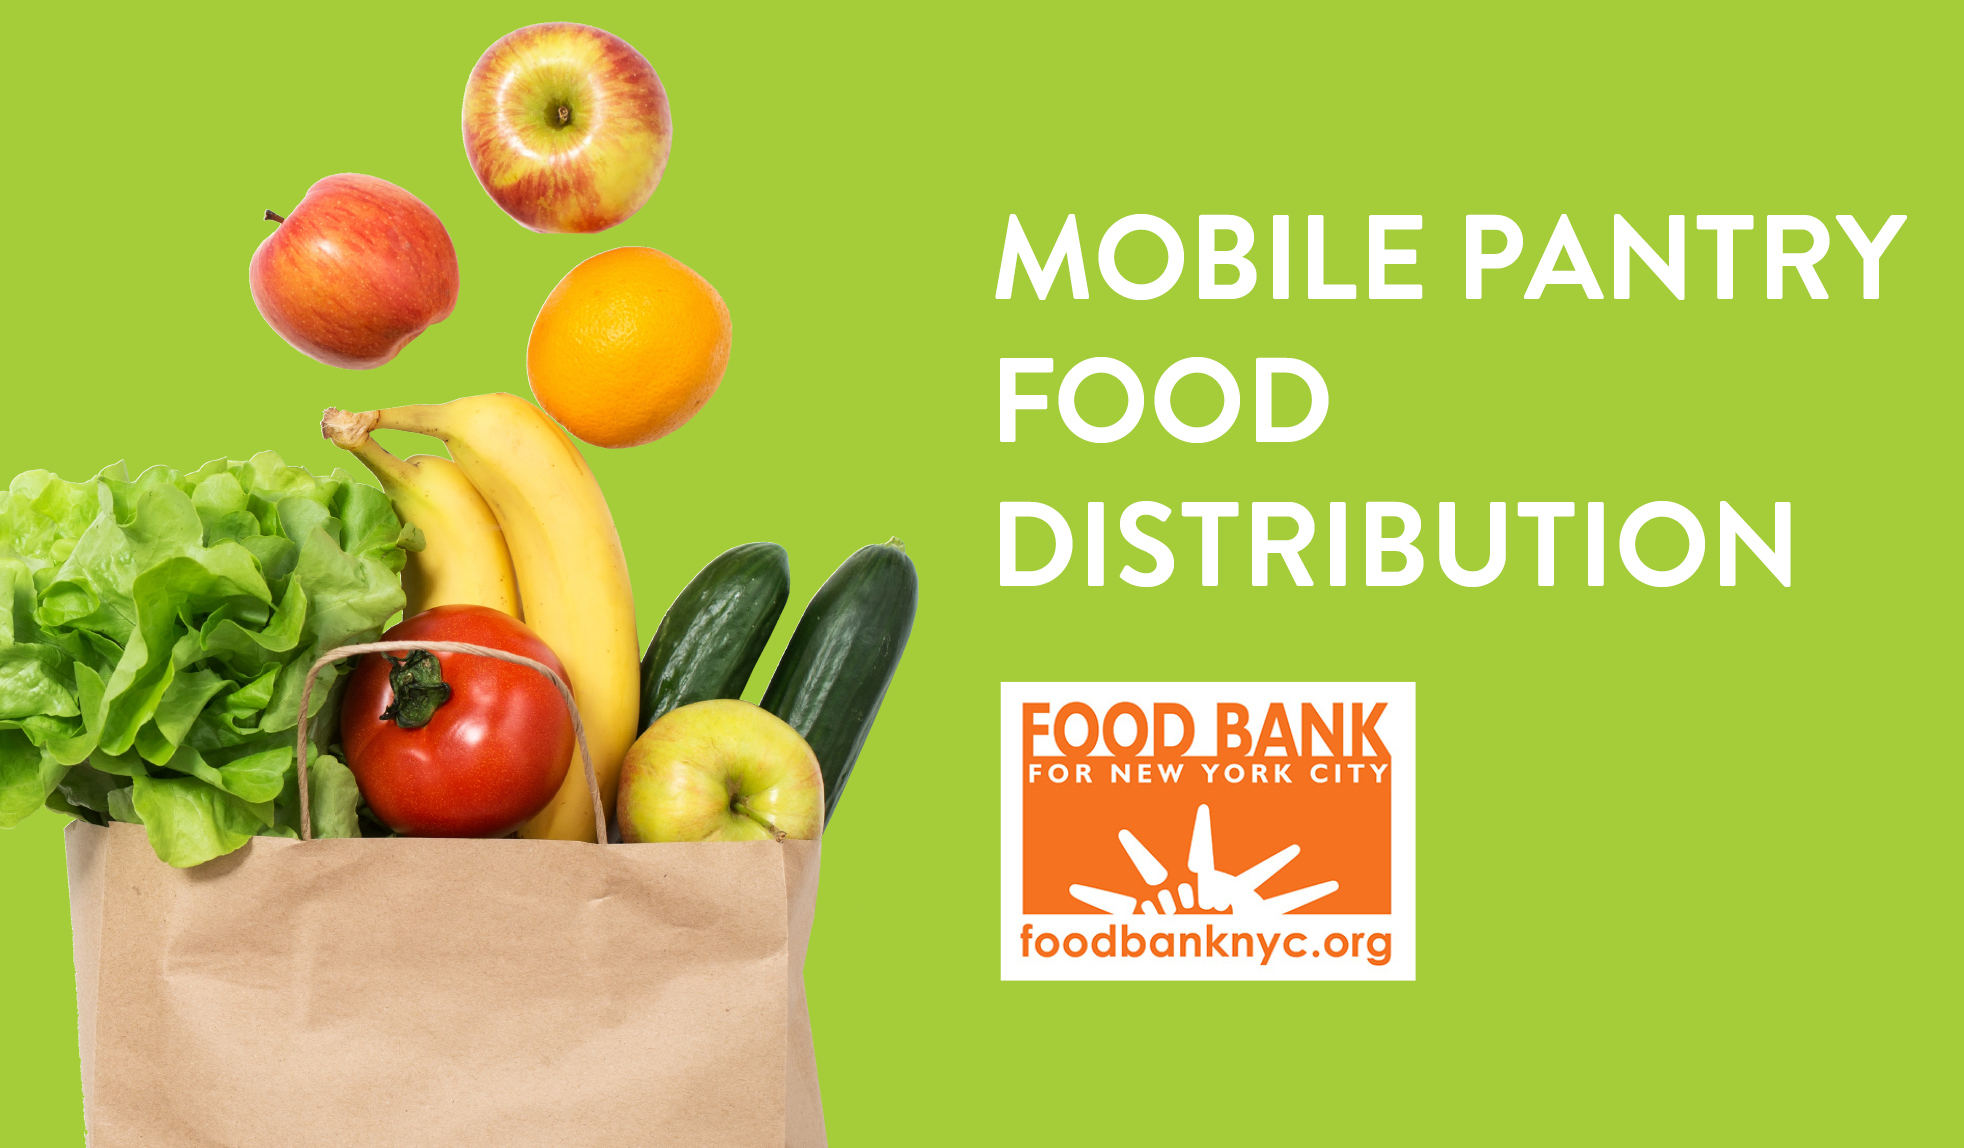 Join QPL and Food Bank for NYC for monthly food distributions at Rochdale Village and St. Albans.